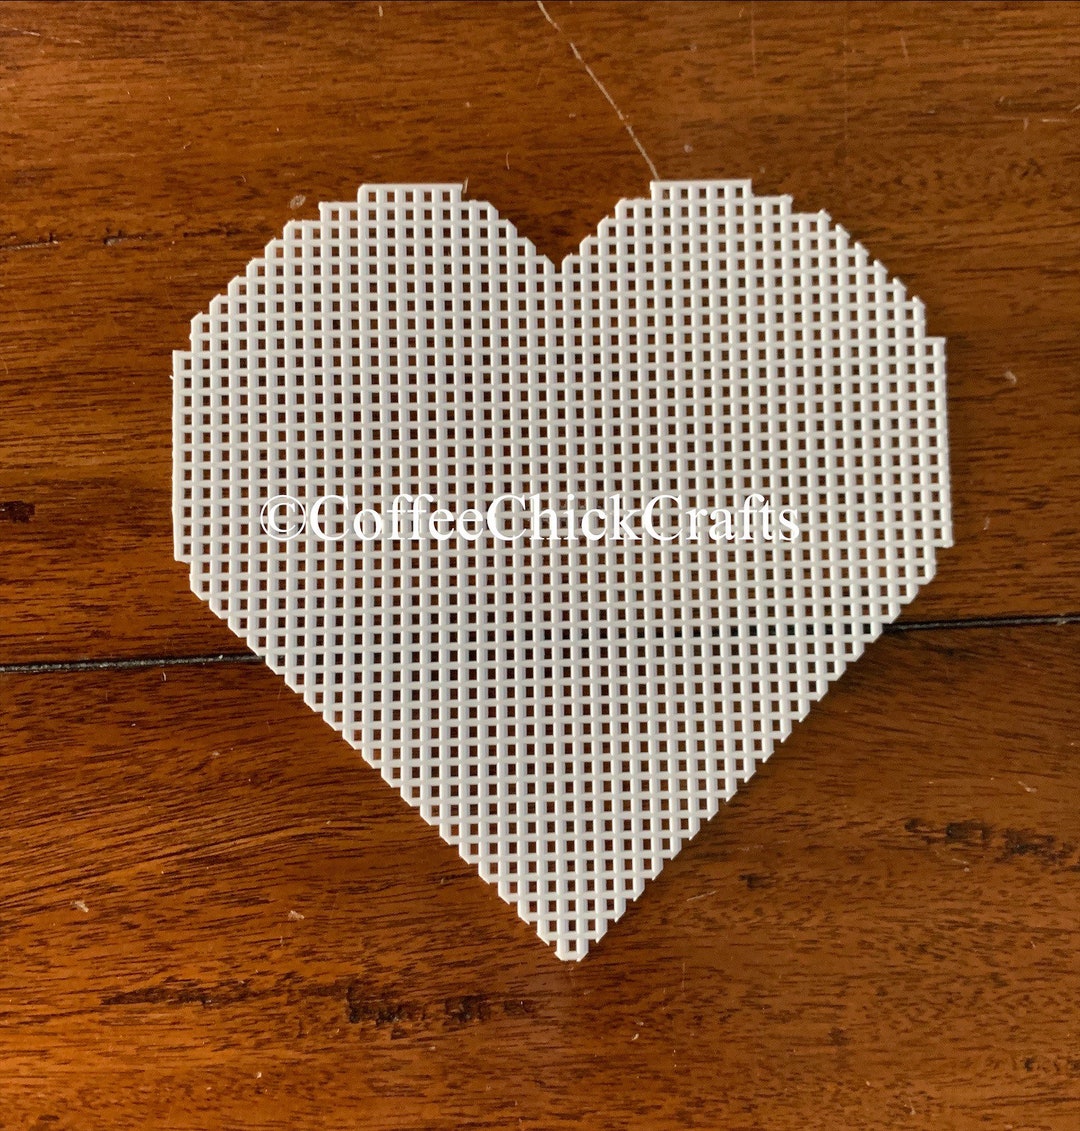 2 Pack 10 x 10 Heart Shape Canvas by Creatology™